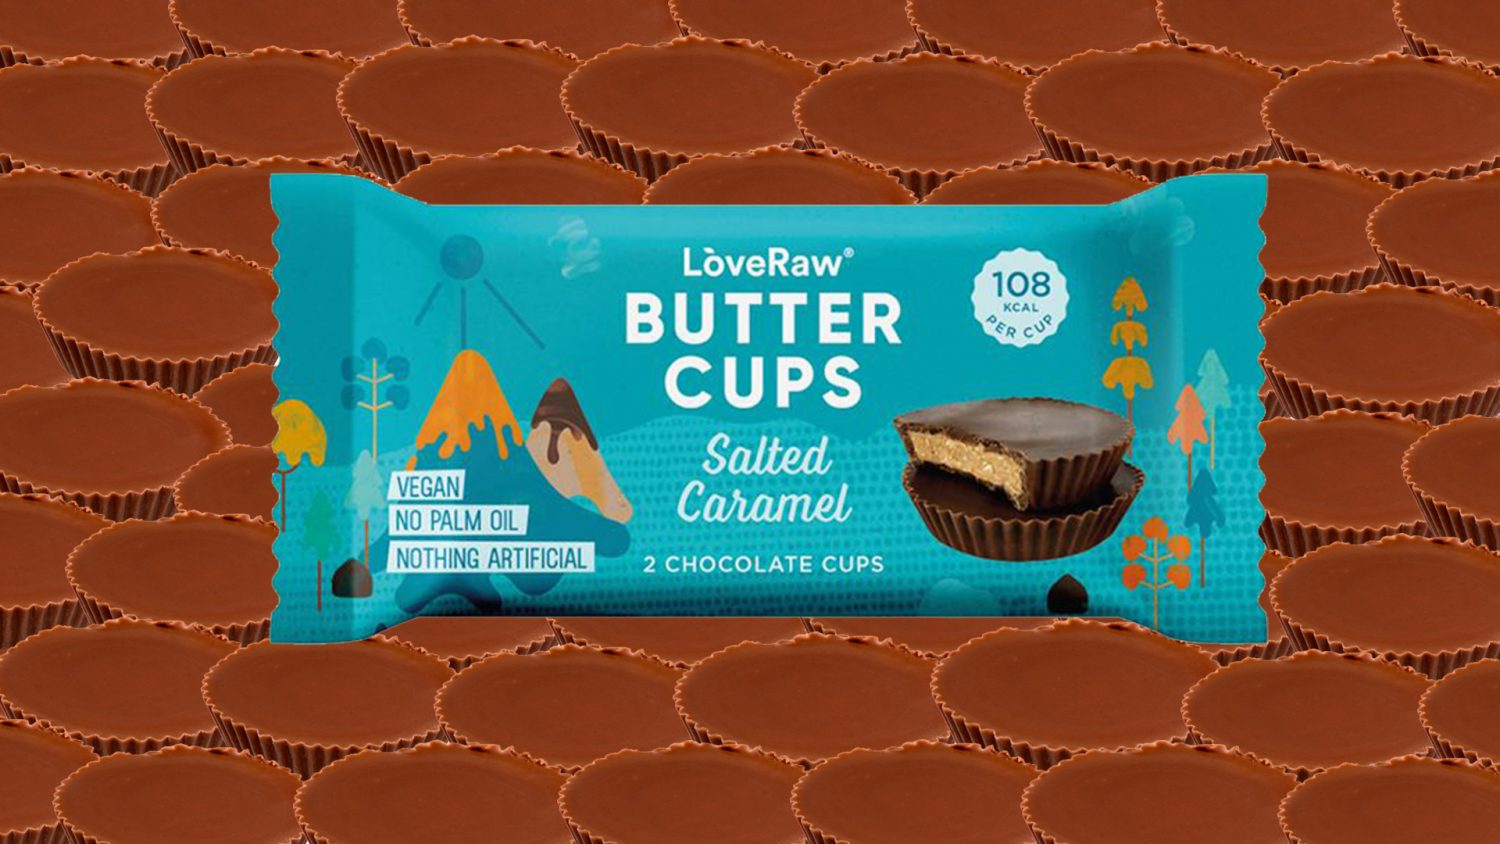 Palm Oil-Free Vegan Butter Cups Now At Boots